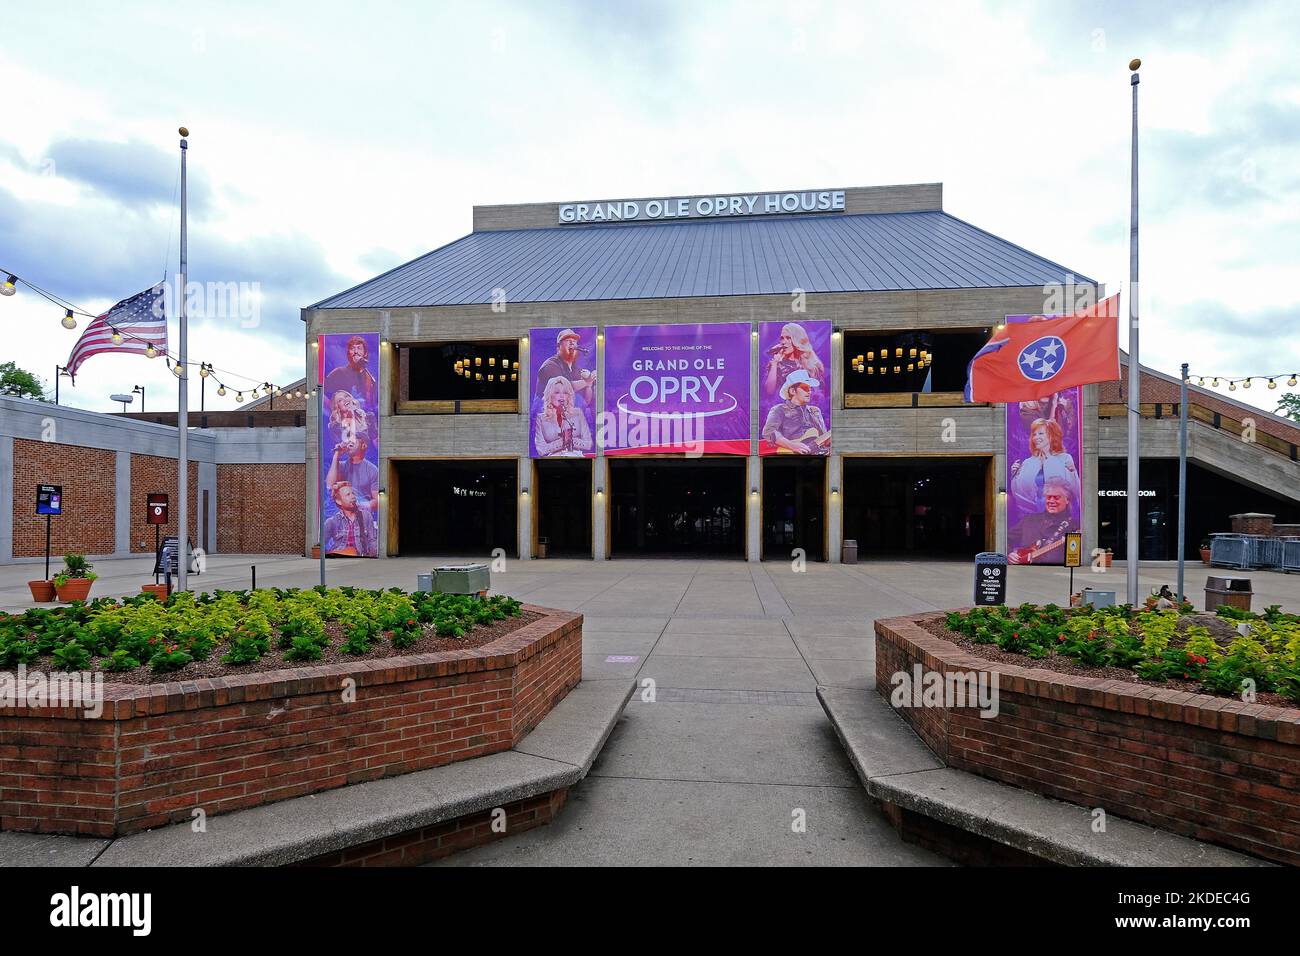 Grand Ole Opry House, Nashville, Tennessee, United States of America Stock Photo